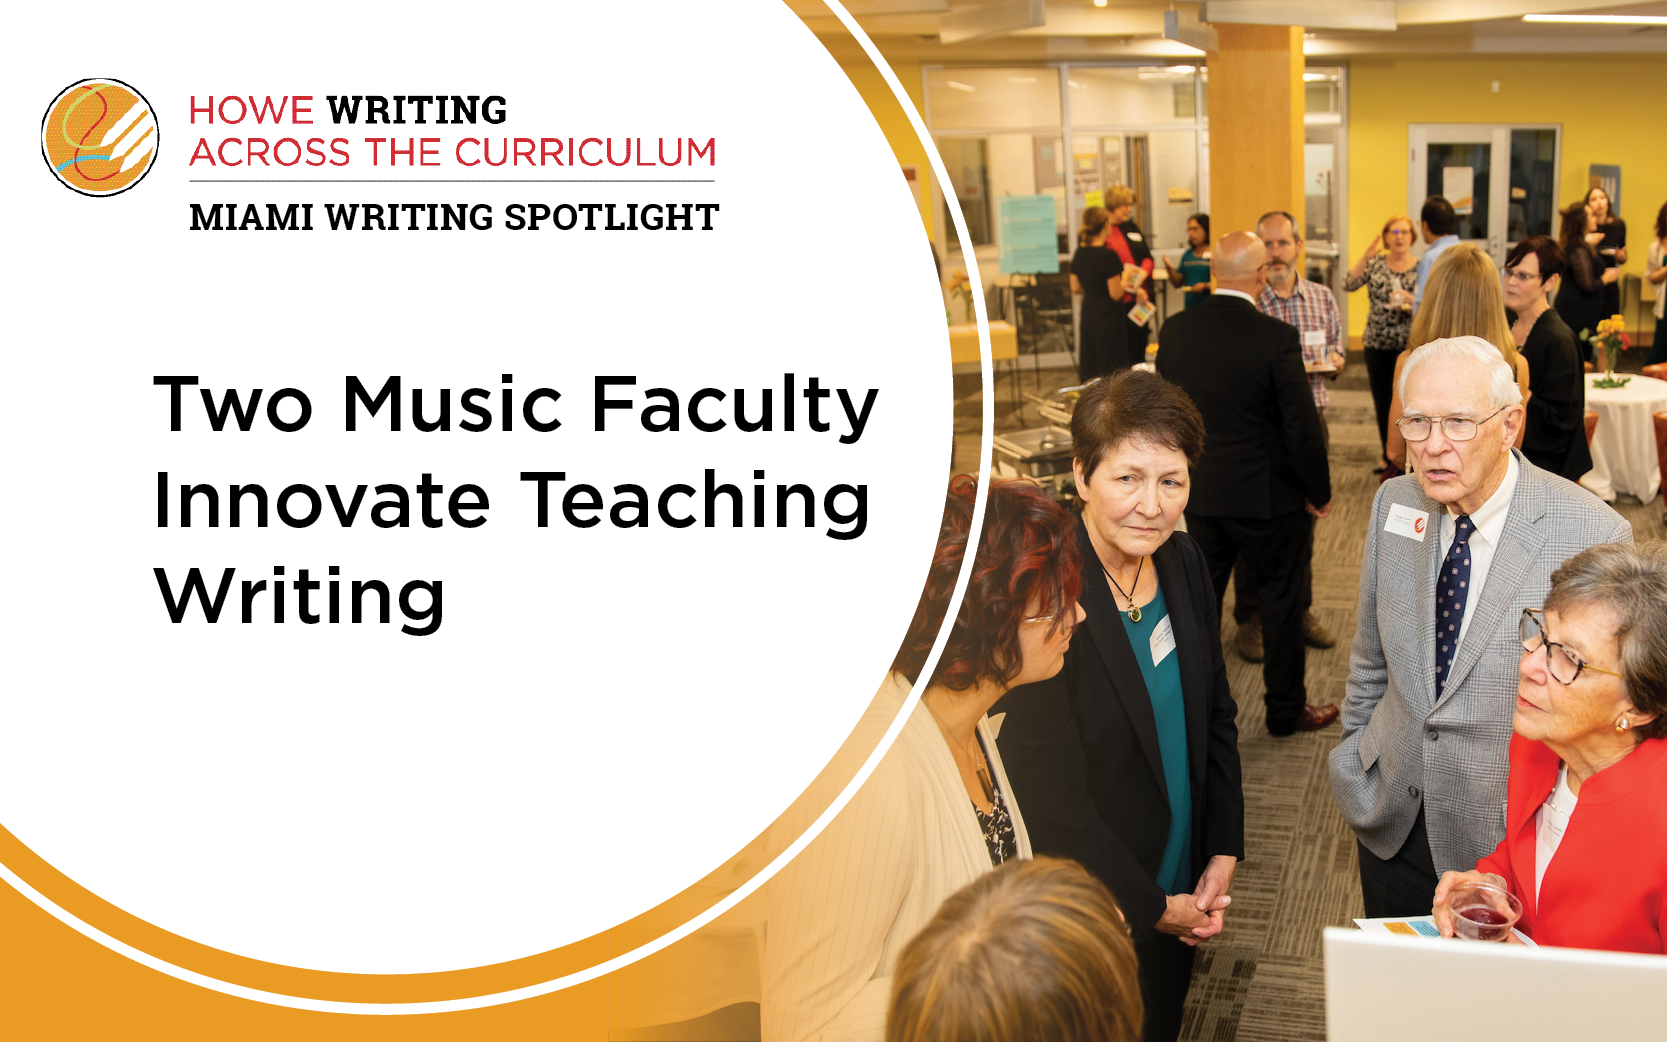 Two Music Faculty Innovate Teaching Writing